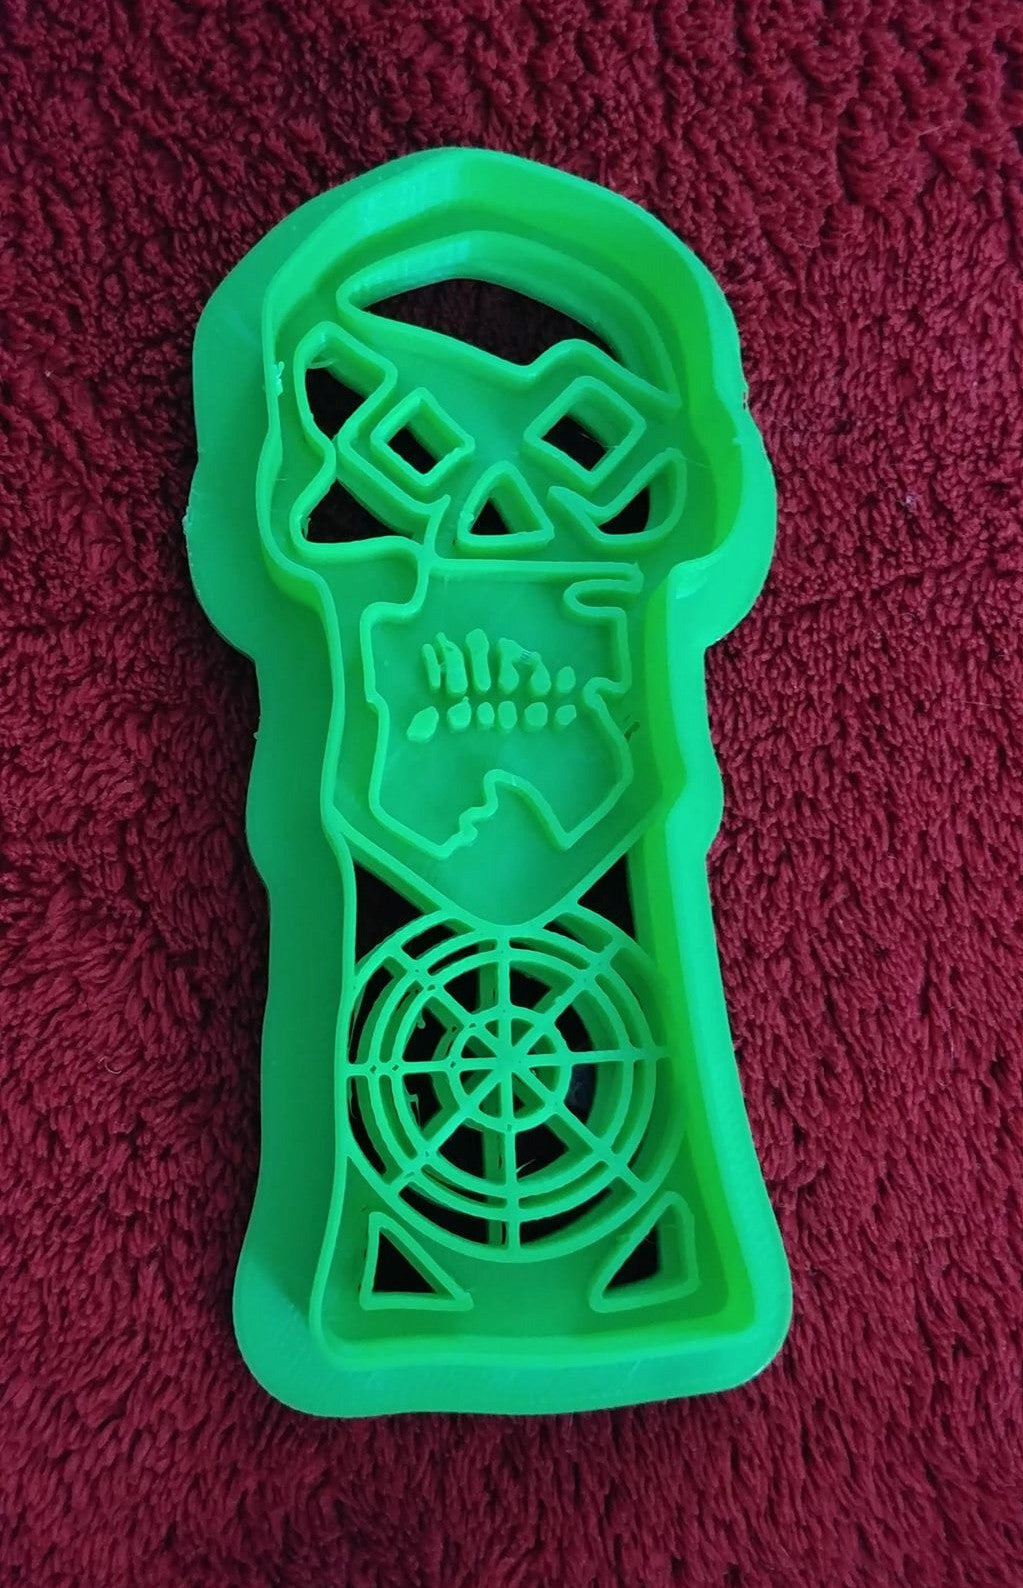 3D Printed Cookie Cutter Inspired by Goonies Skull Necklace